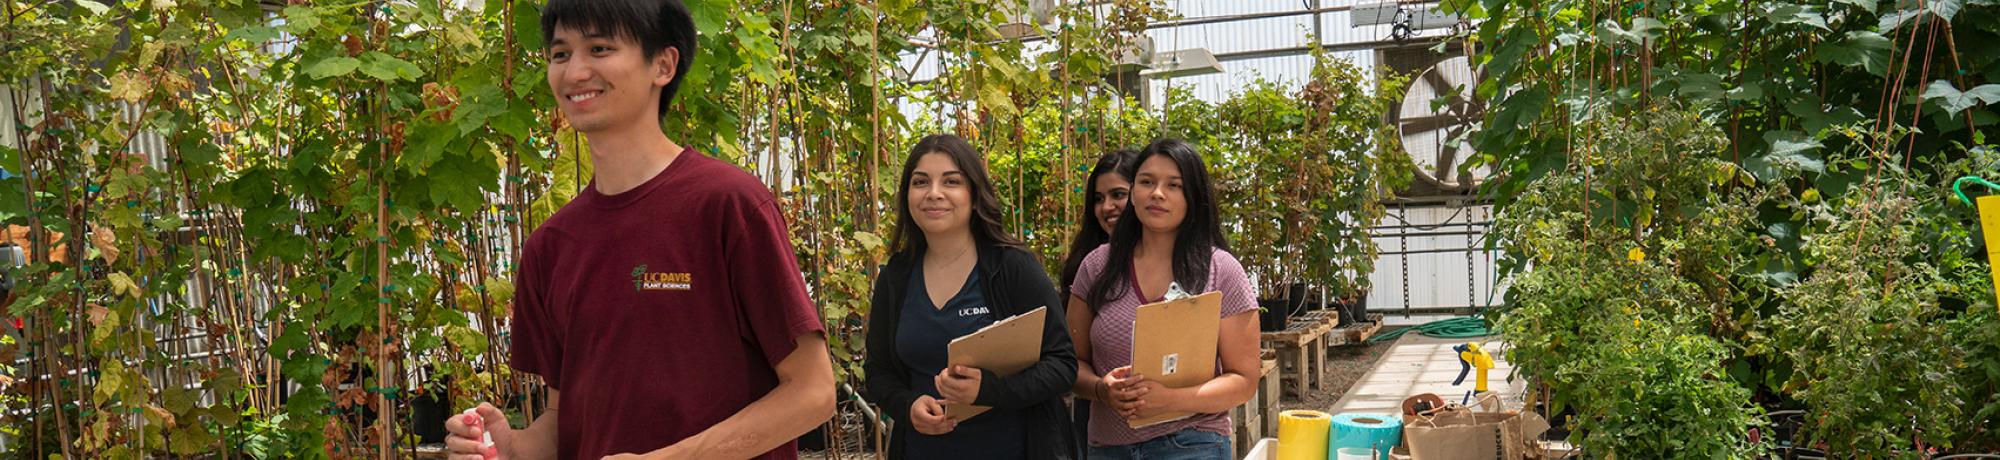 Student interns working in the campus greenhouses.